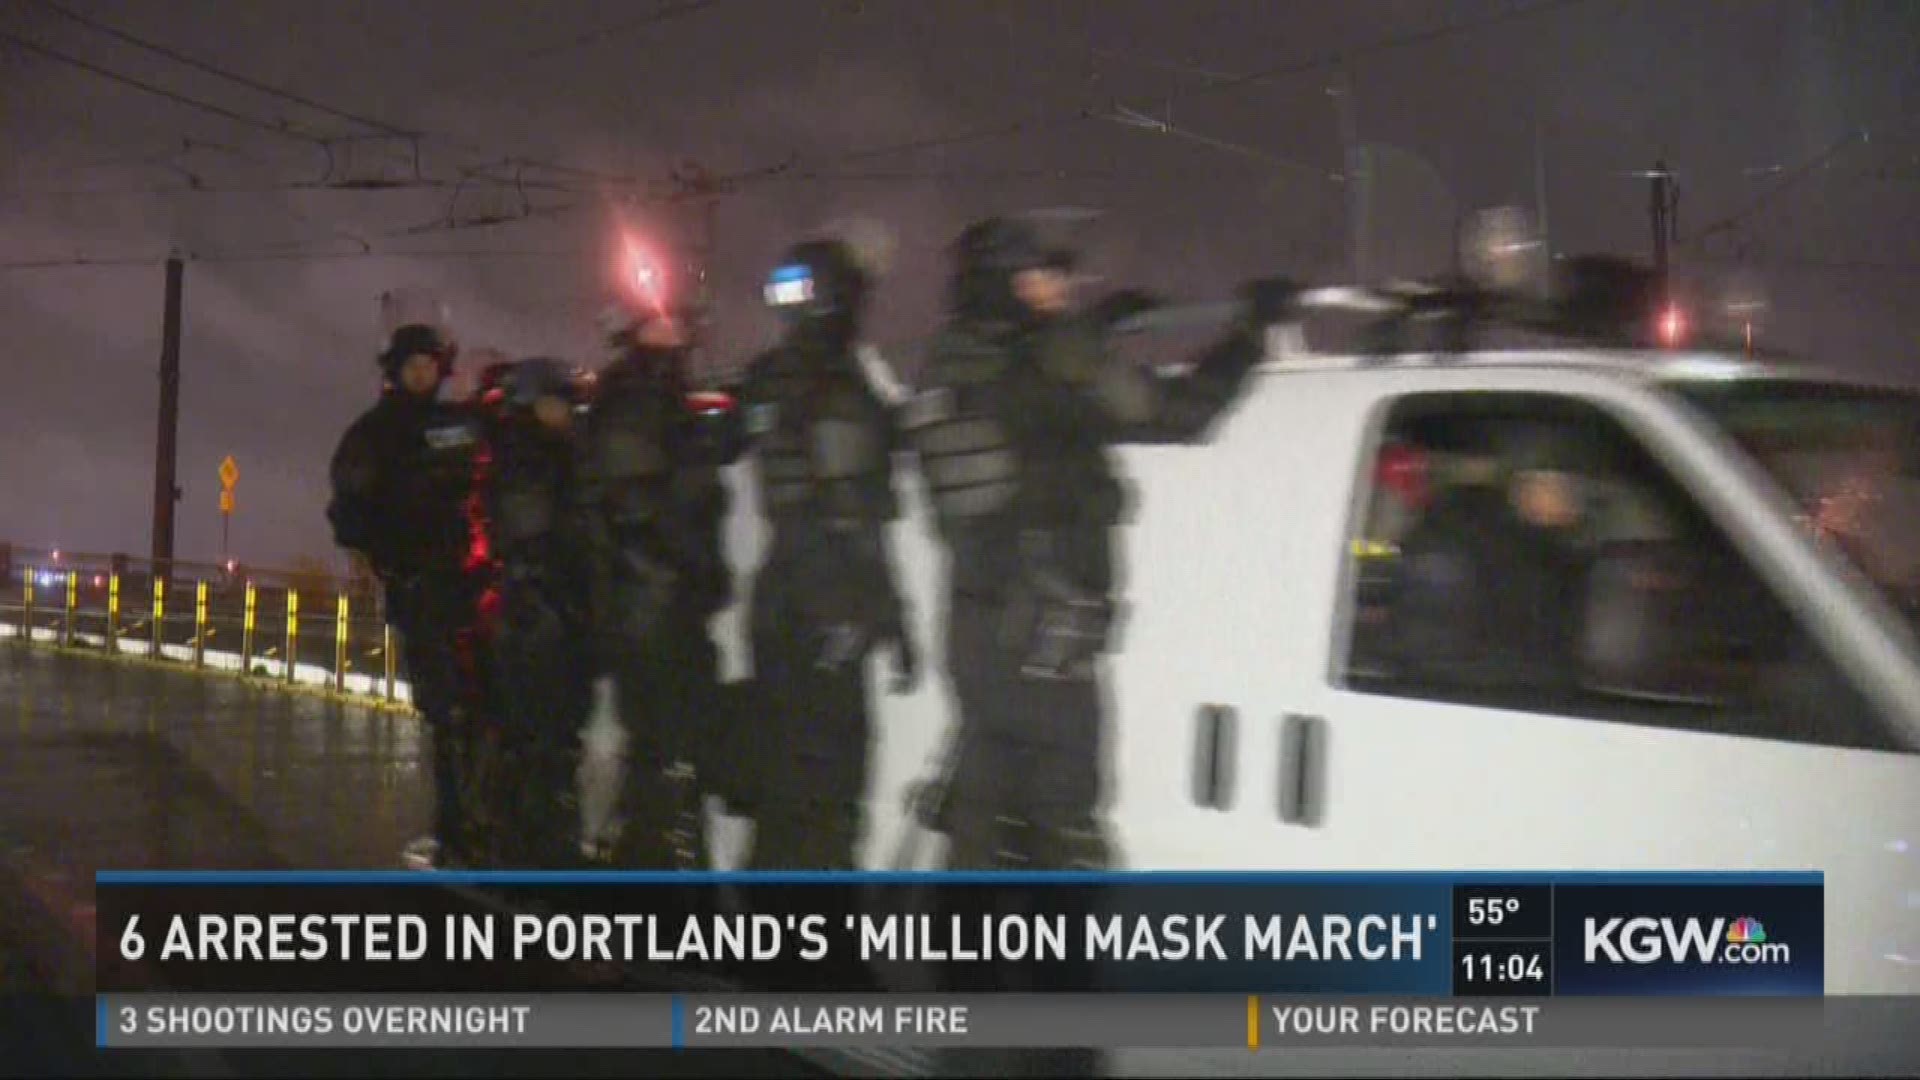 6 arrested in Portland's 'Million Mask March'